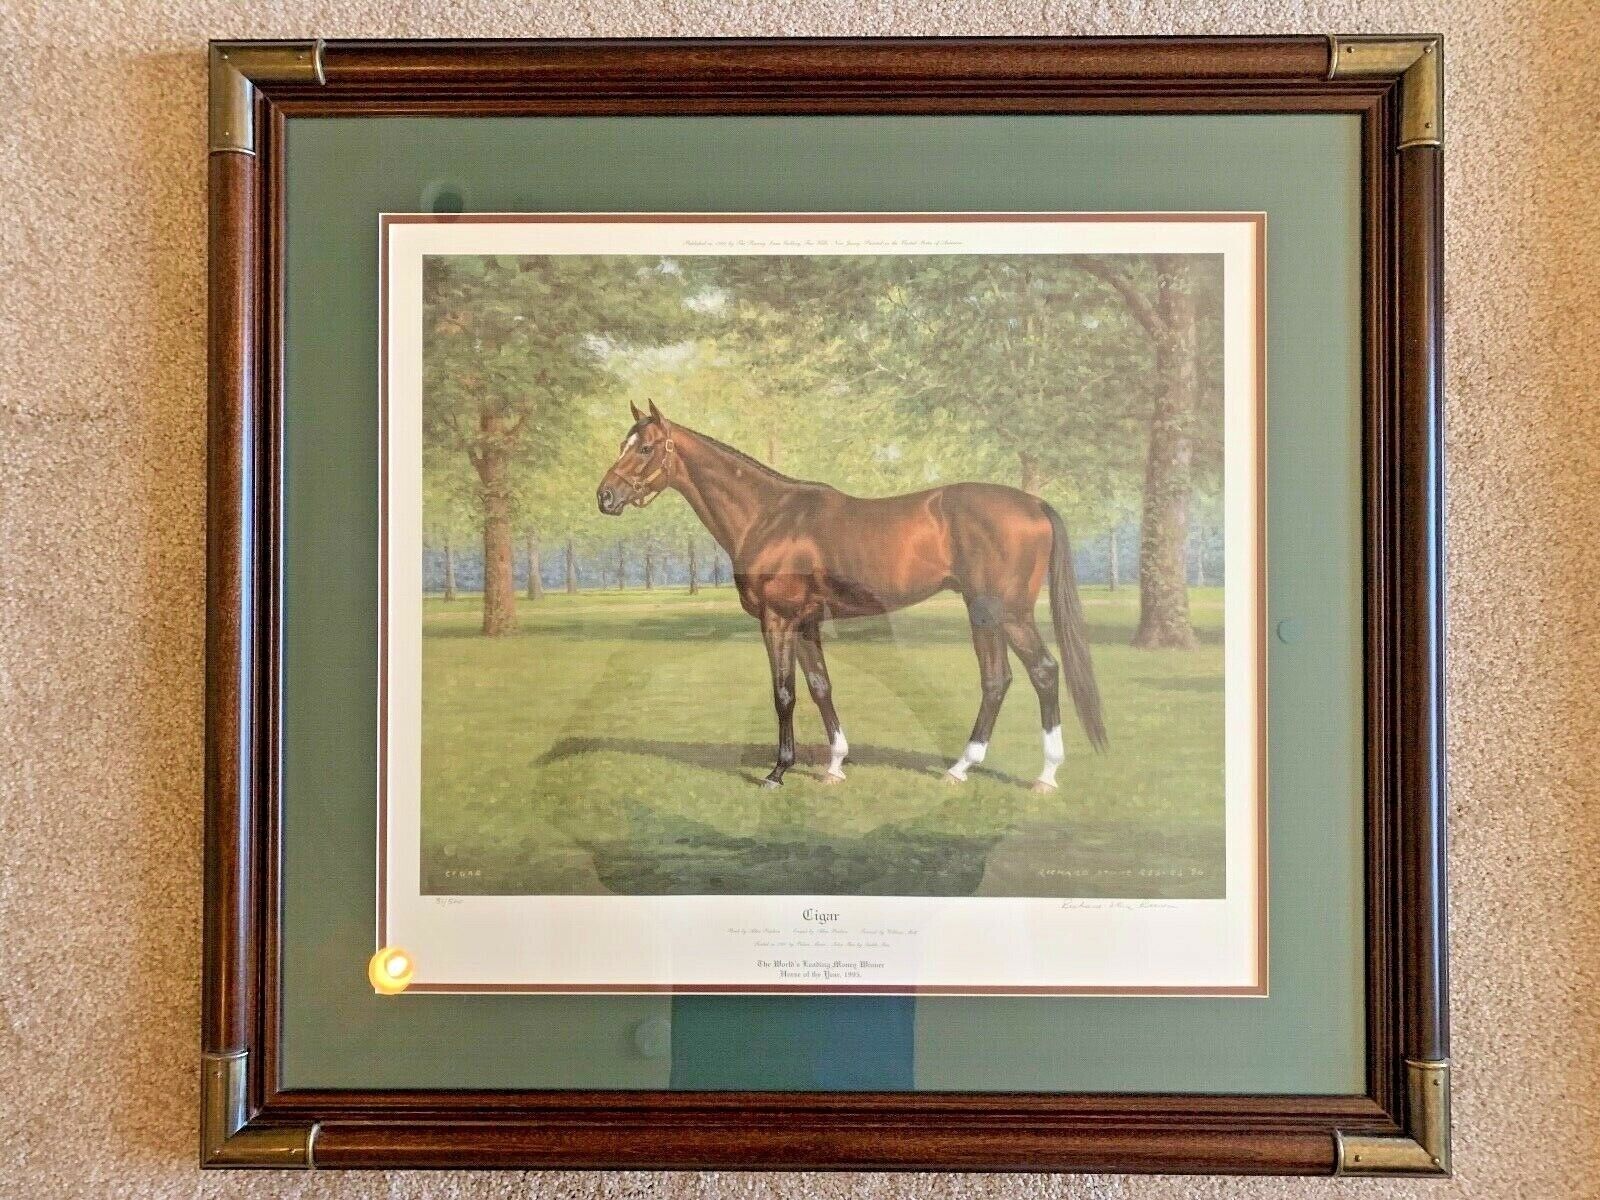 Richard stone reeves cigar limited edition lithograph signed of